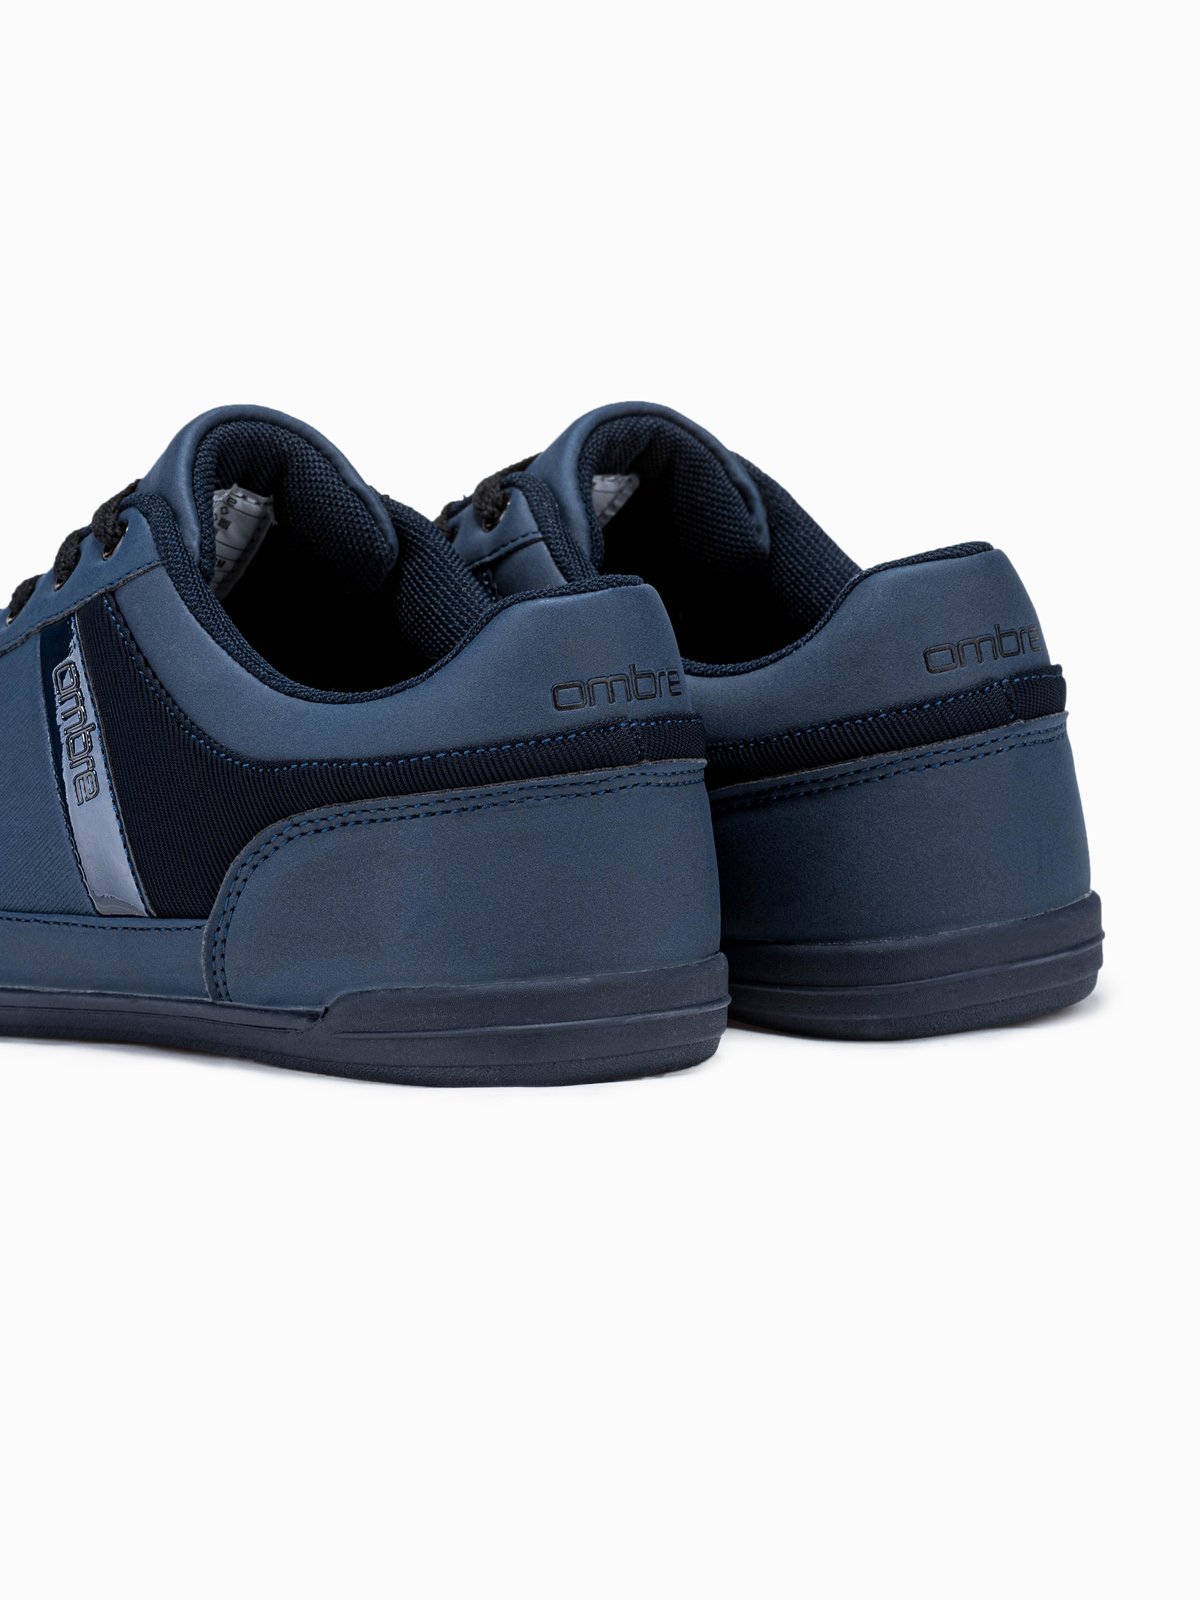 navy blue casual sneakers